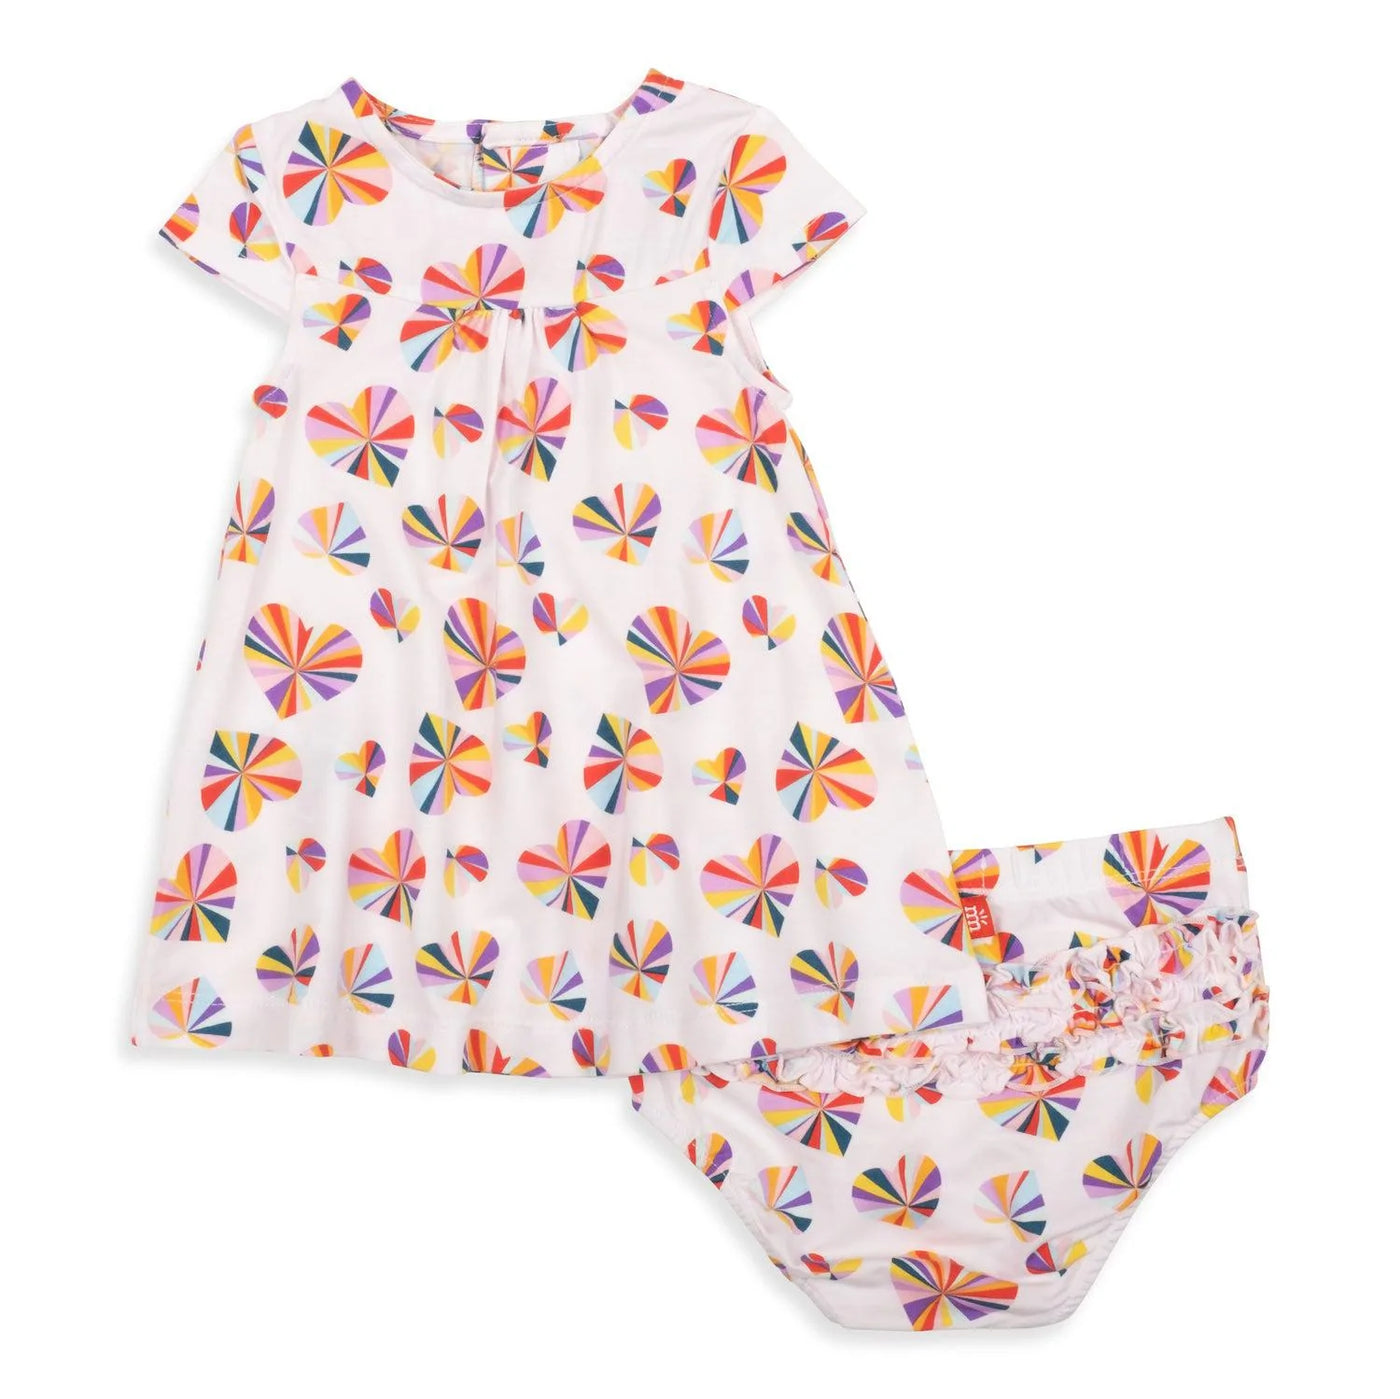 Groove Is In The Heart Modal Infant Ruffle Dress